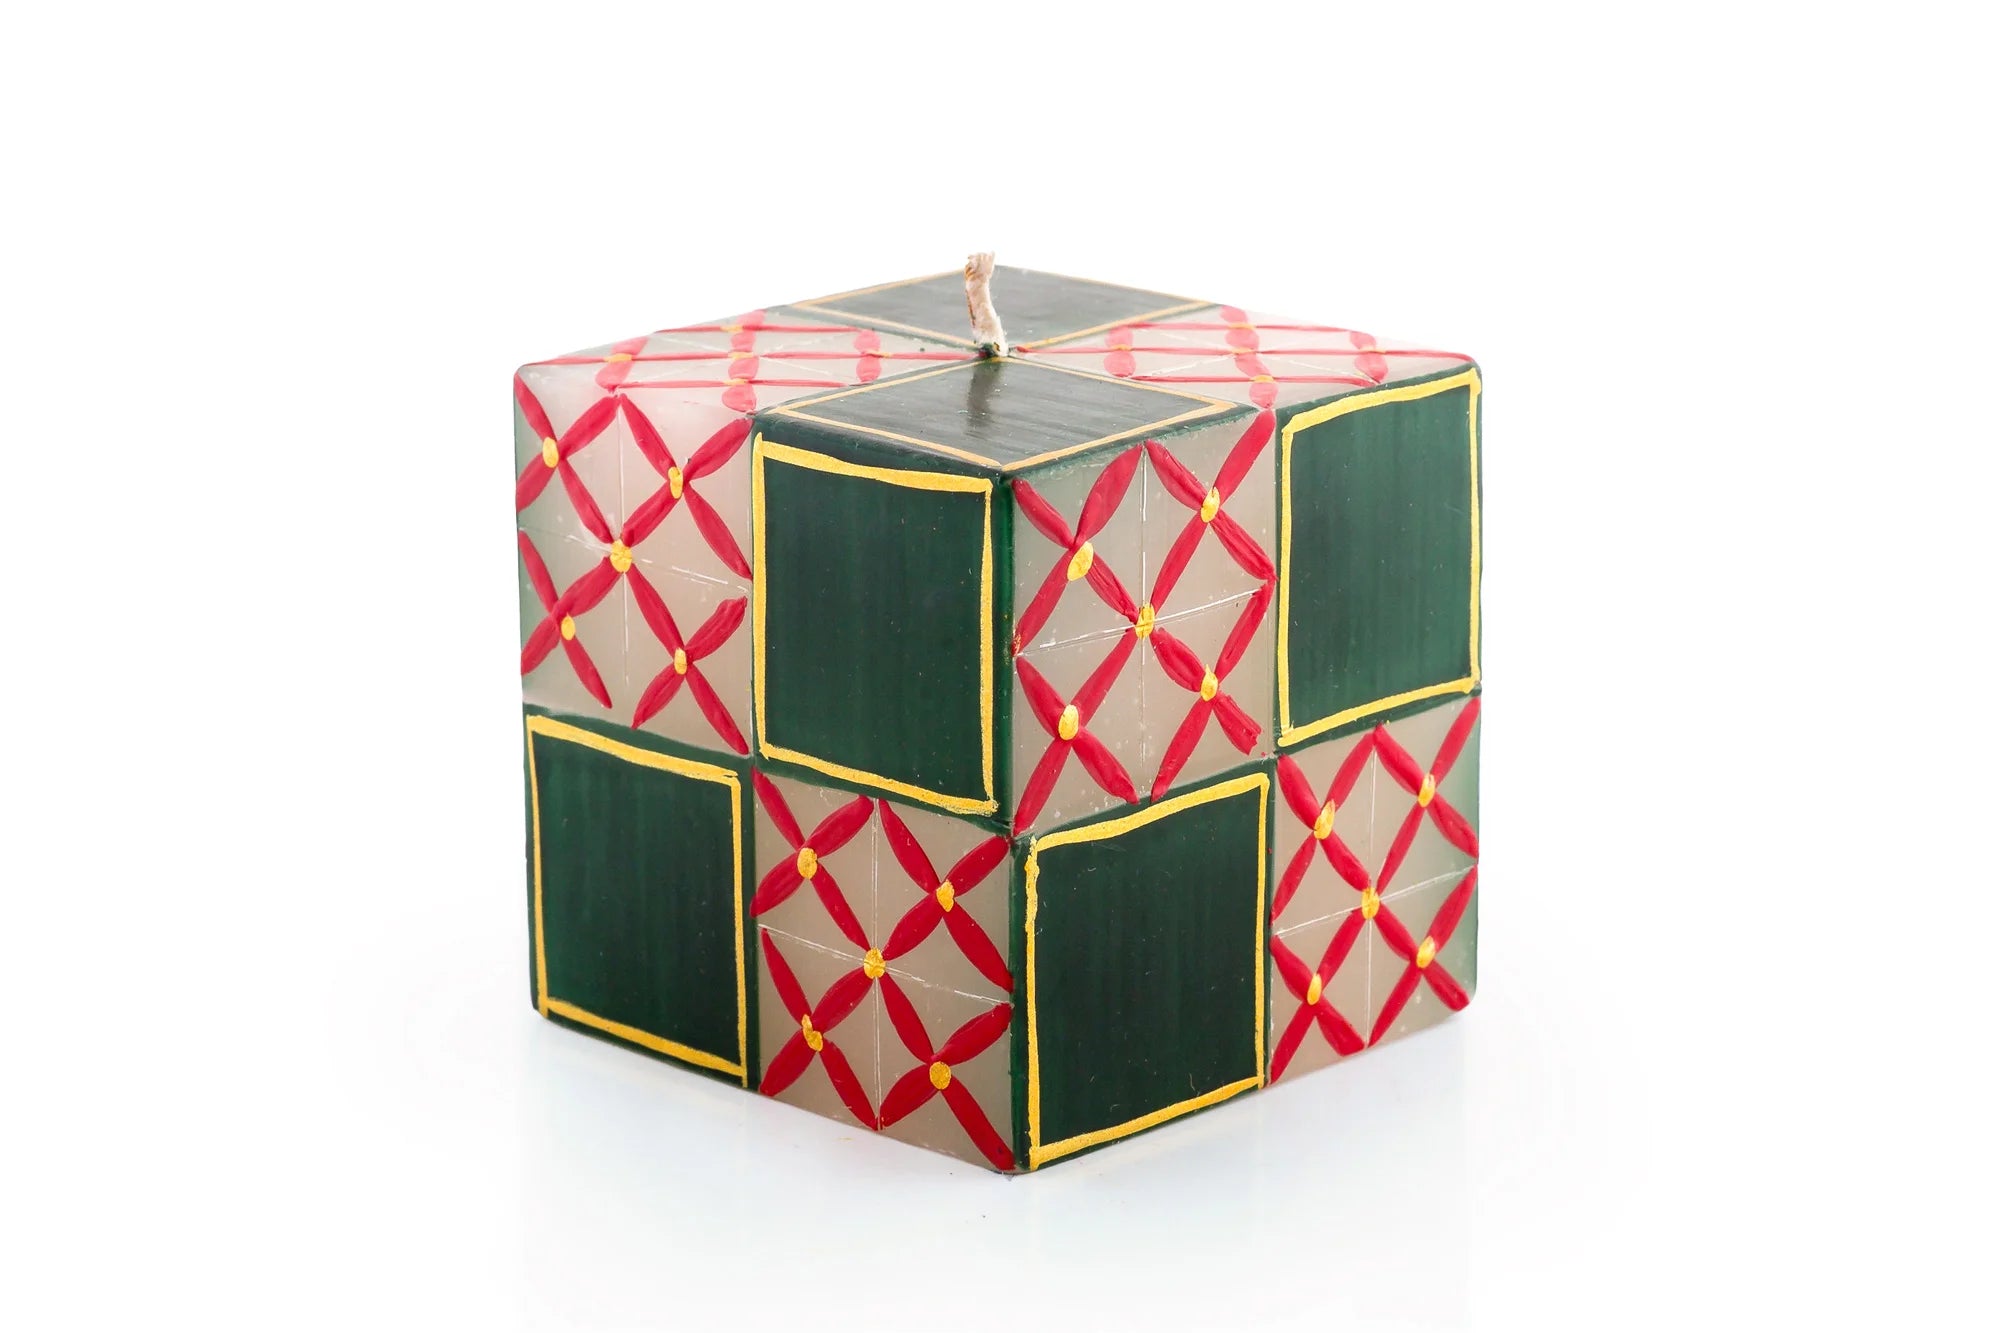 3" x 3" x 3" Christmas cube in various traditional Christmas patterns in red, dark green, light green and gold. This cube is painted with red checkerboard design with green squares.